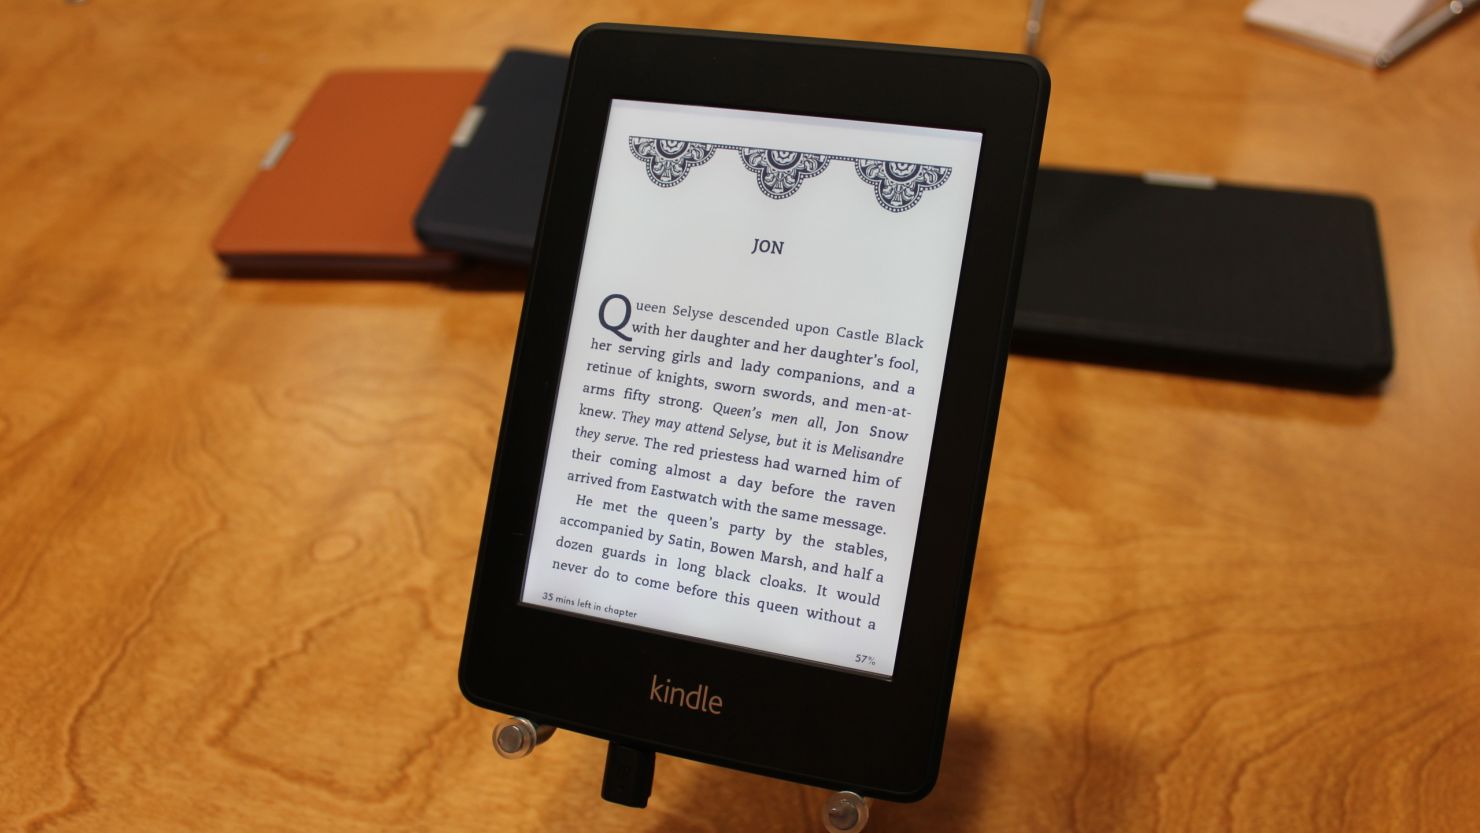 The new Kindle Paperwhite e-reader has a lighted screen for reading in the dark.